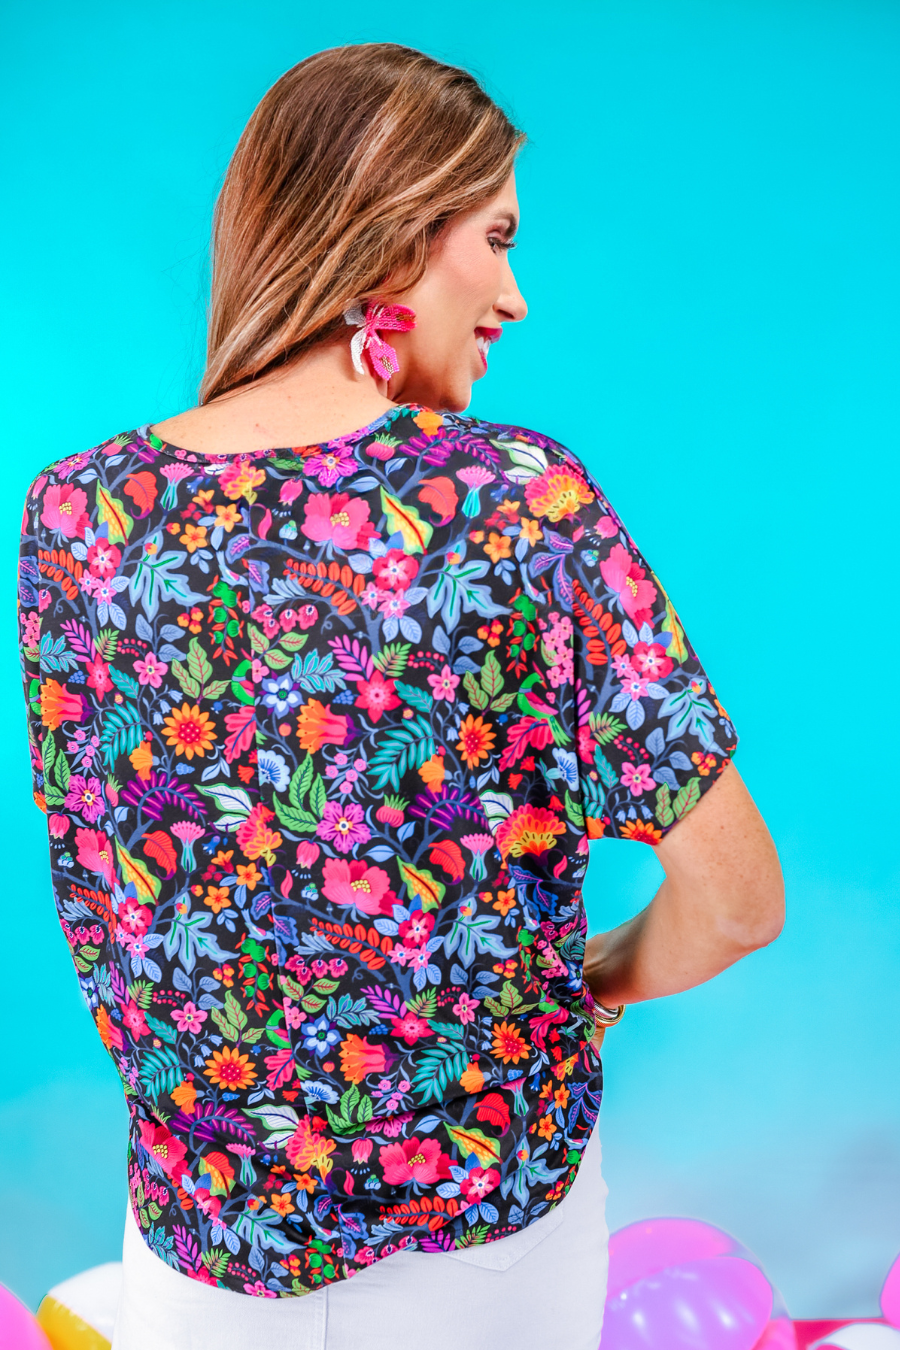 PREORDER- Fiesta Time Tunic Top by Jess Lea (Ships Early June)